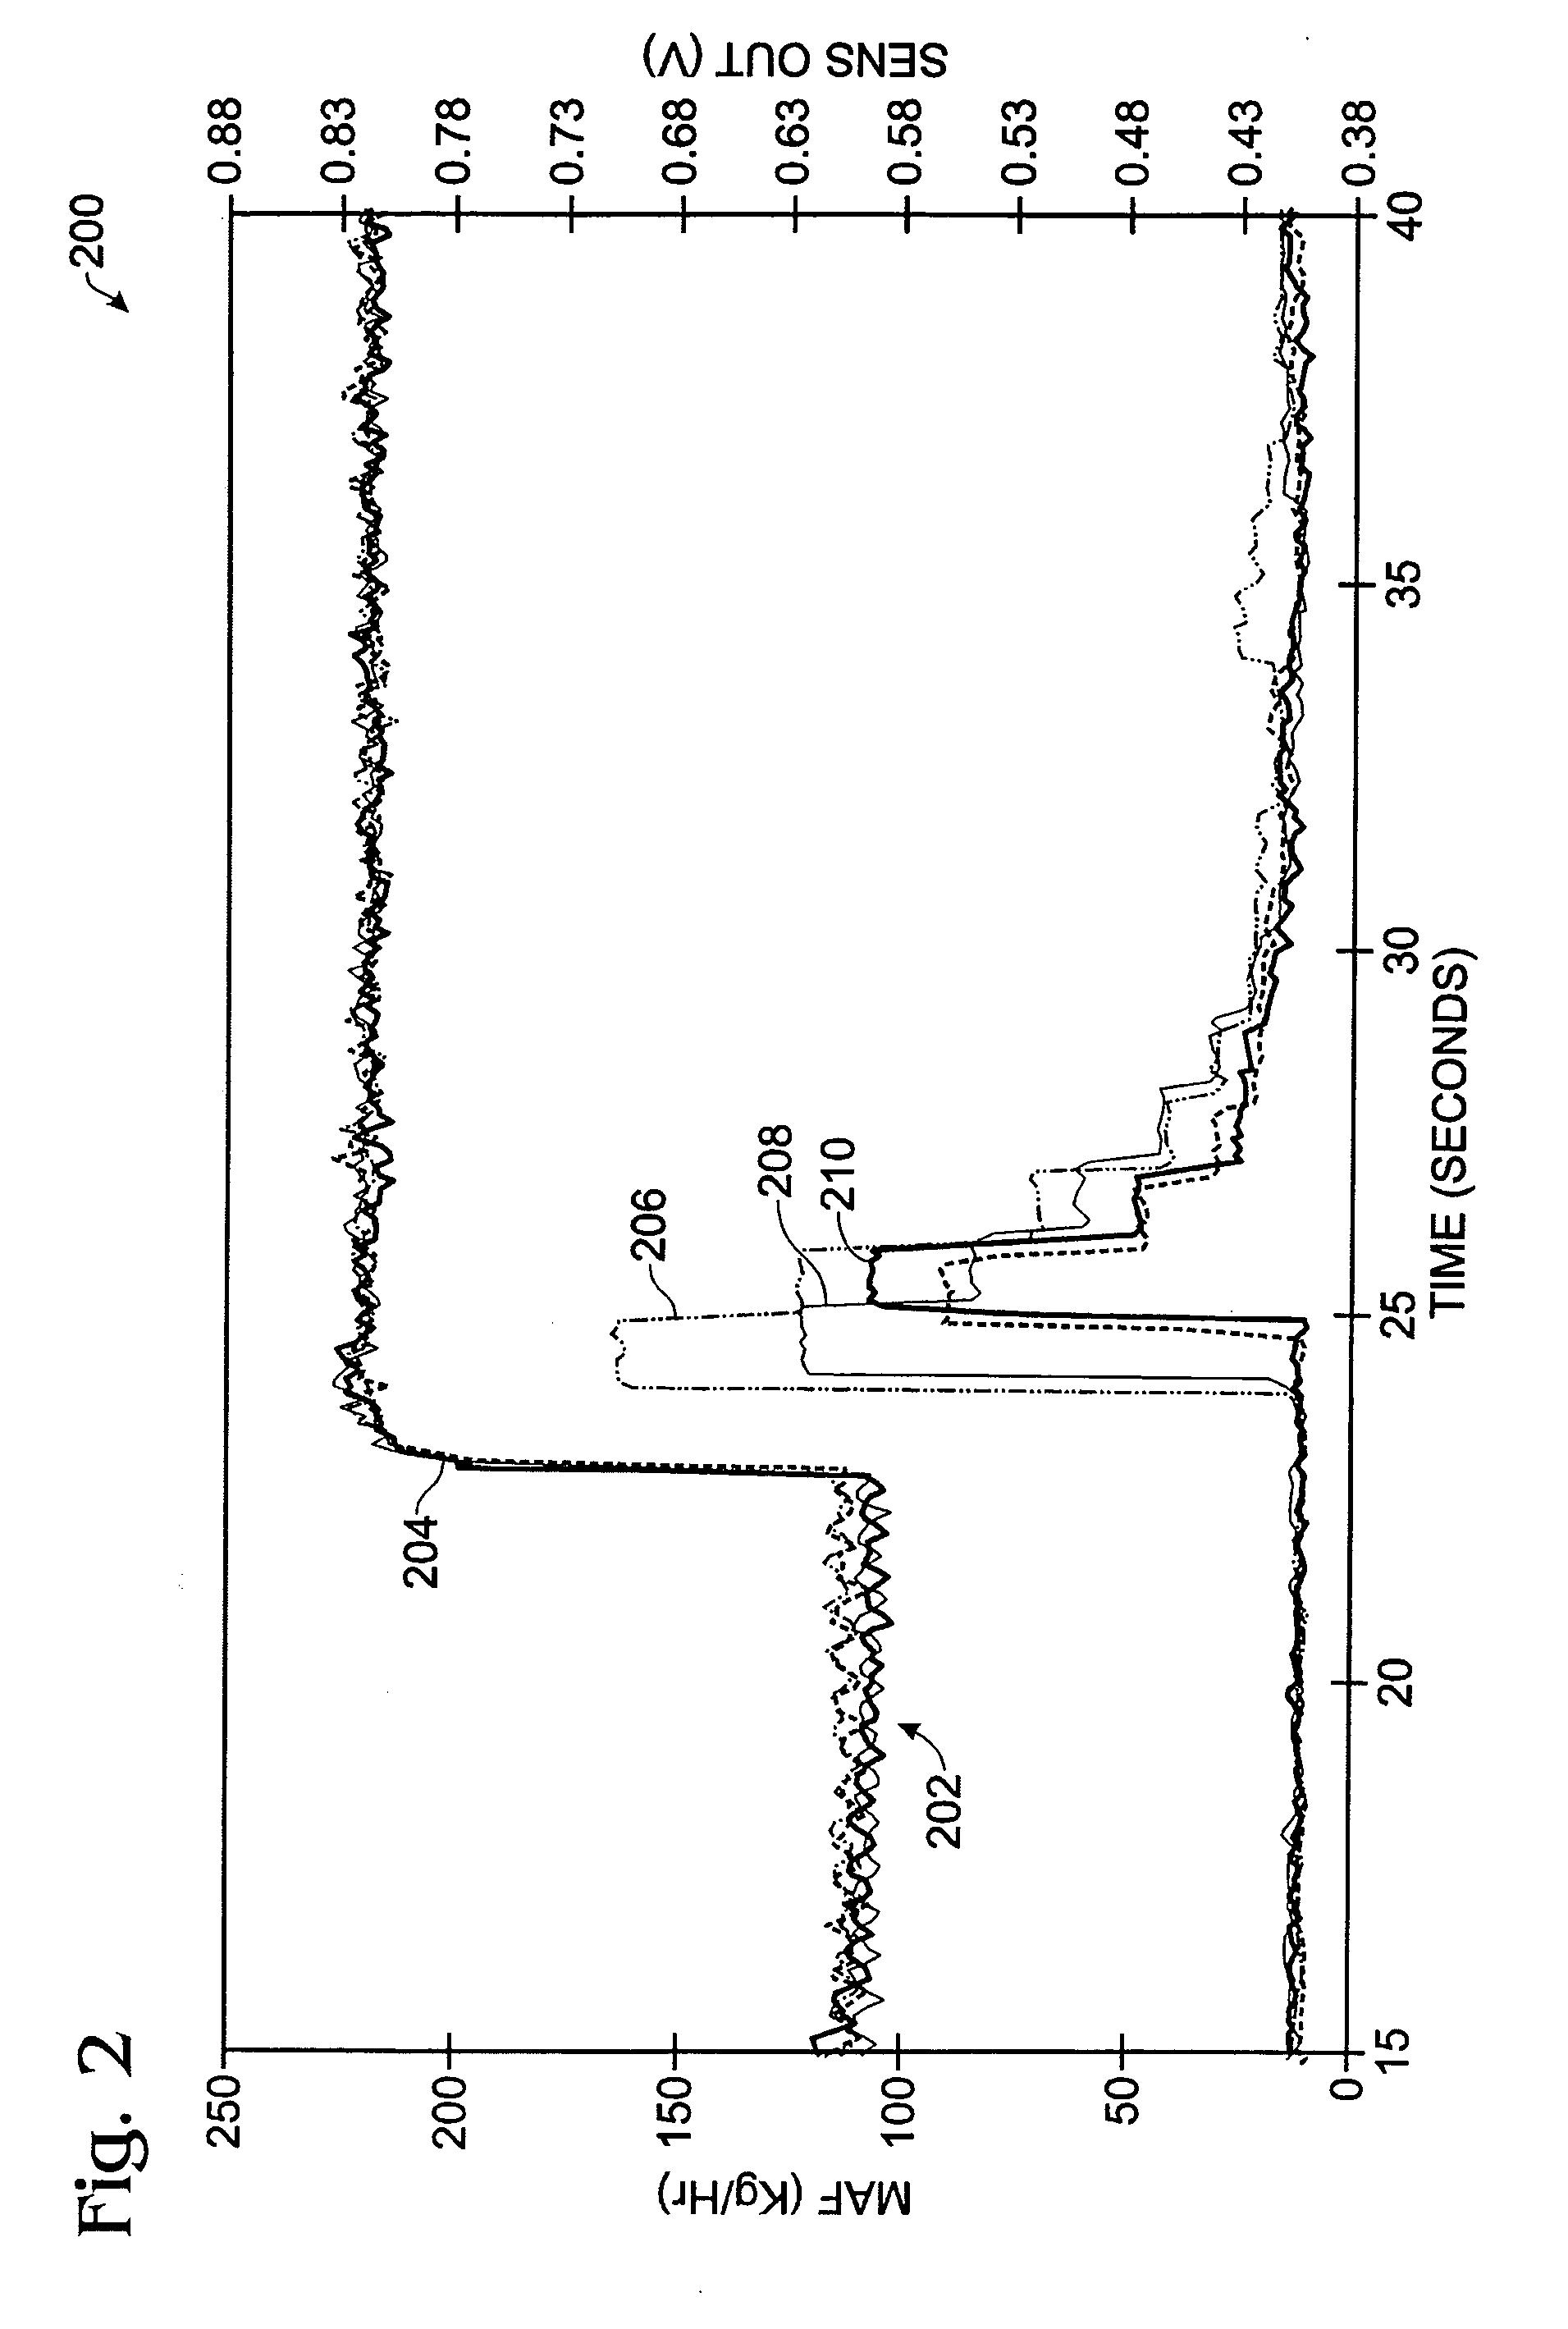 System and method for monitoring particulate filter performance